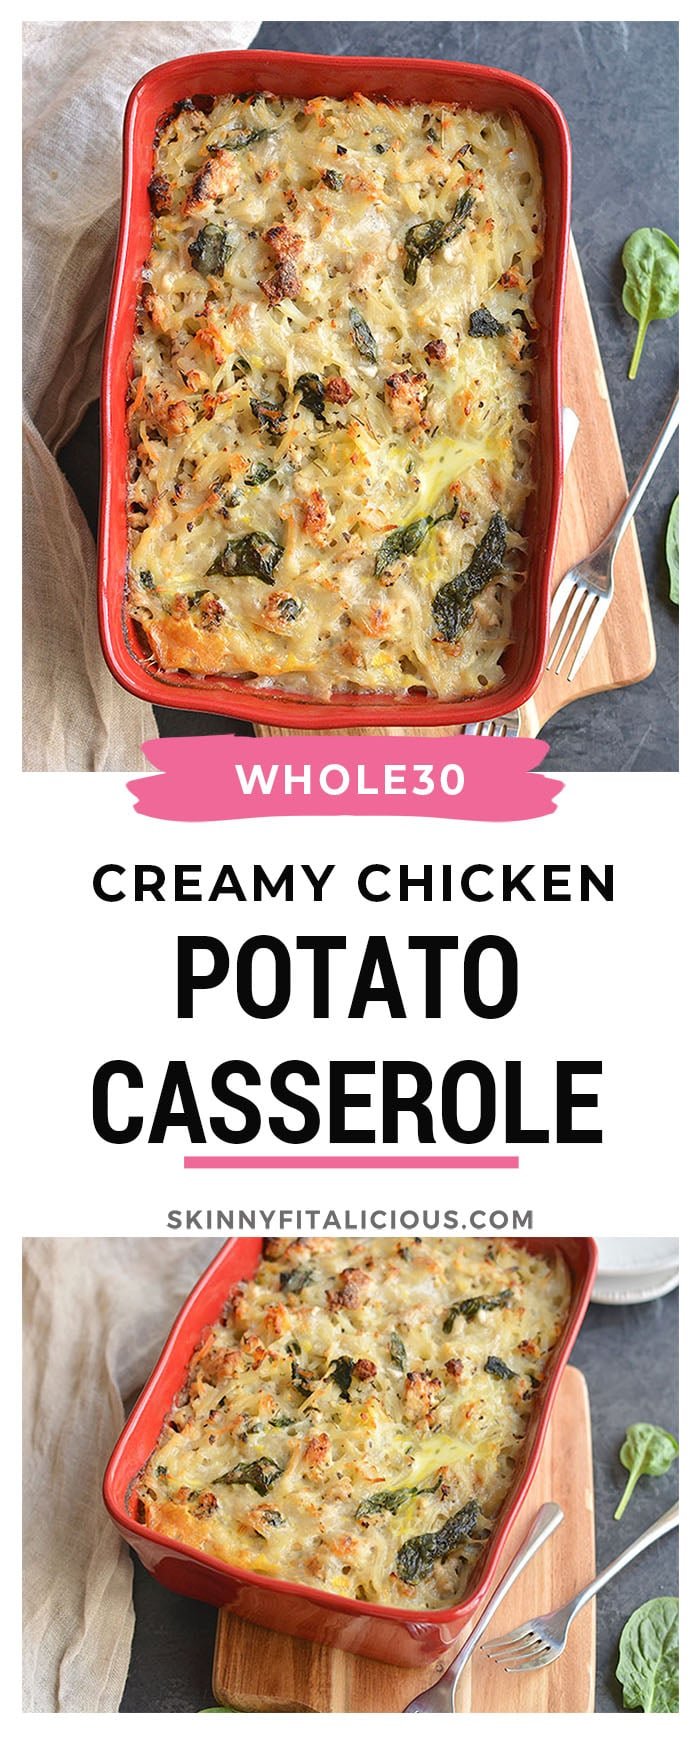 Creamy Chicken Potato Casserole! A comforting meal with potatoes, chicken and a dairy-free cream sauce. A simple, wholesome Paleo dinner that's easy to make and Whole30 friendly. Paleo + Gluten Free + Low Calorie